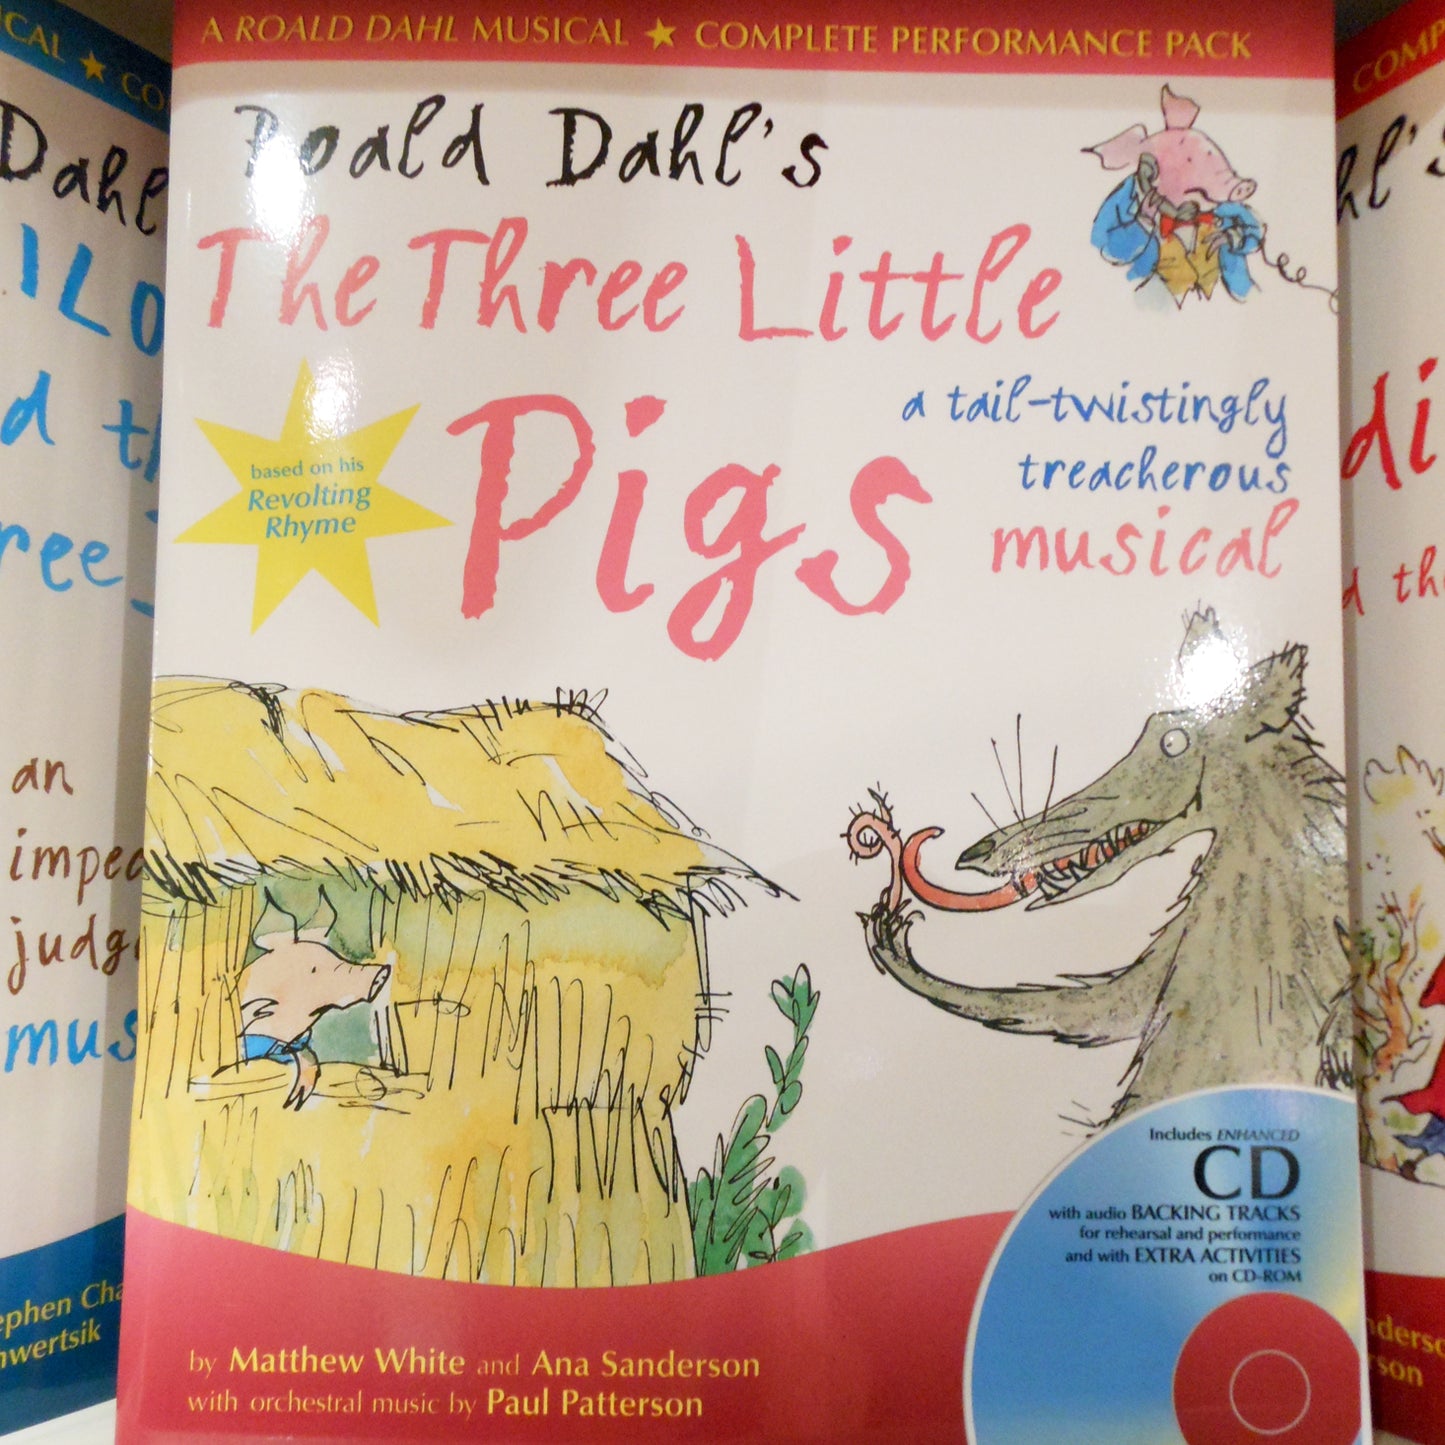 The Three Little Pigs musical based on Roald Dahl's Revolting Rhymes illustrated by Quentin Blake